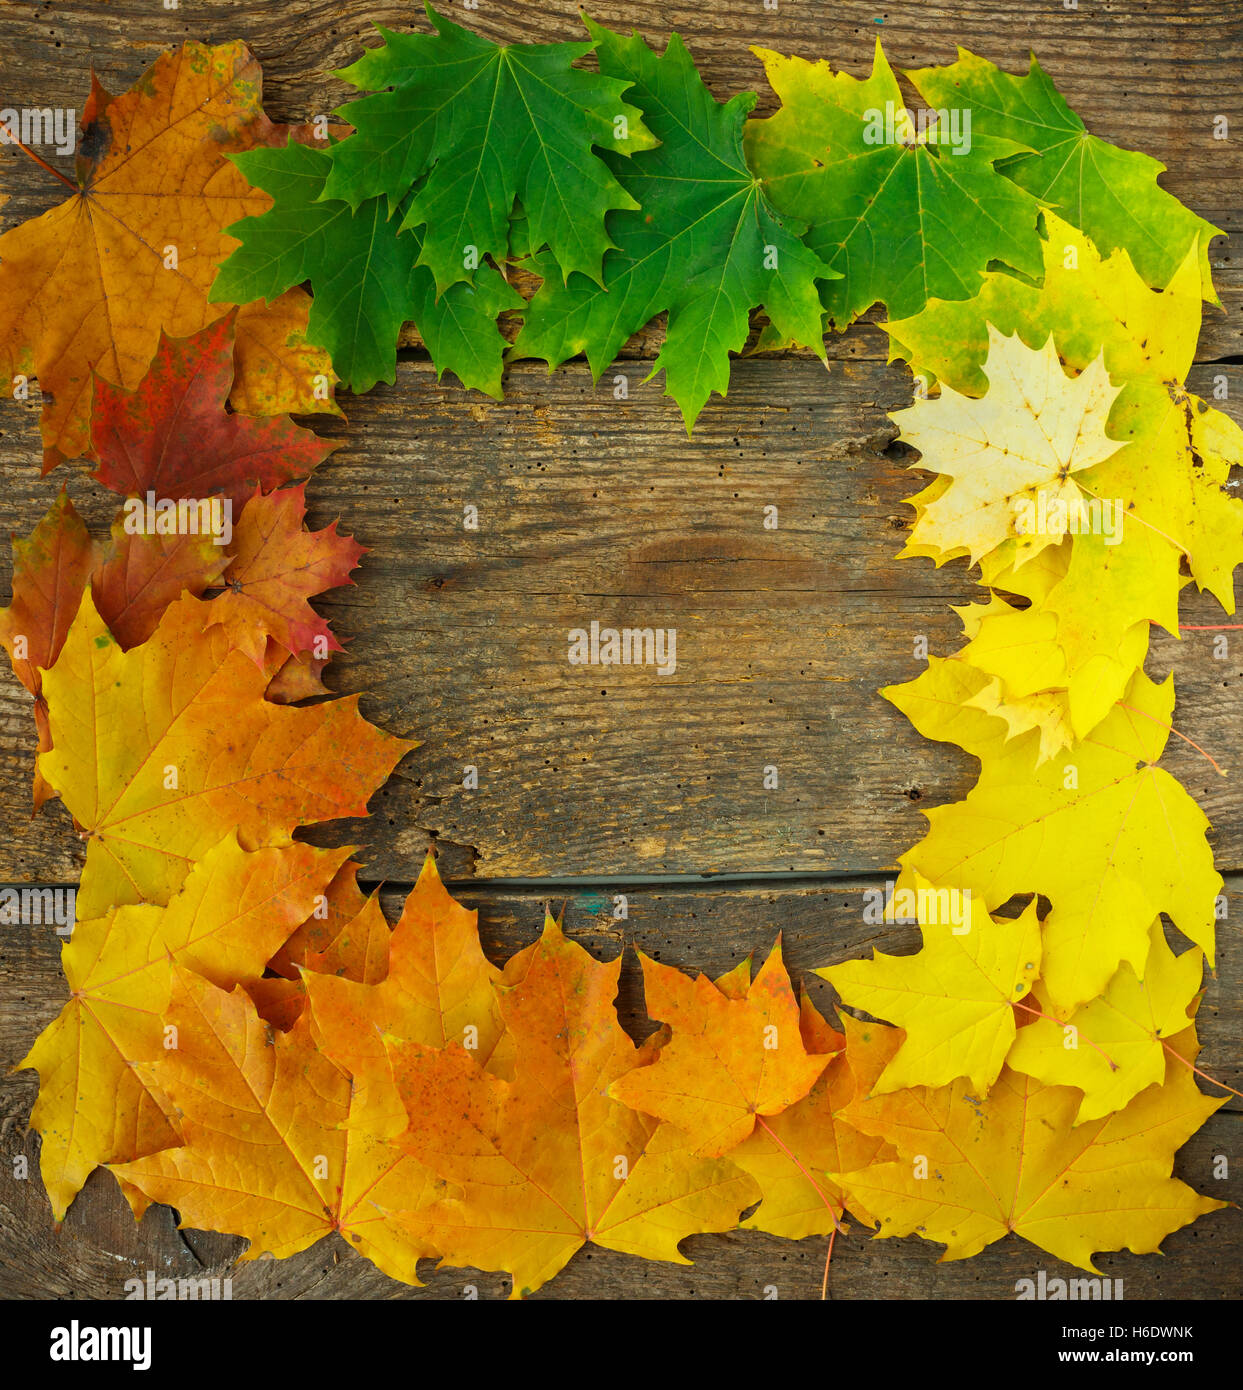 Autumn maple leaves falling frame on wooden background Stock Photo